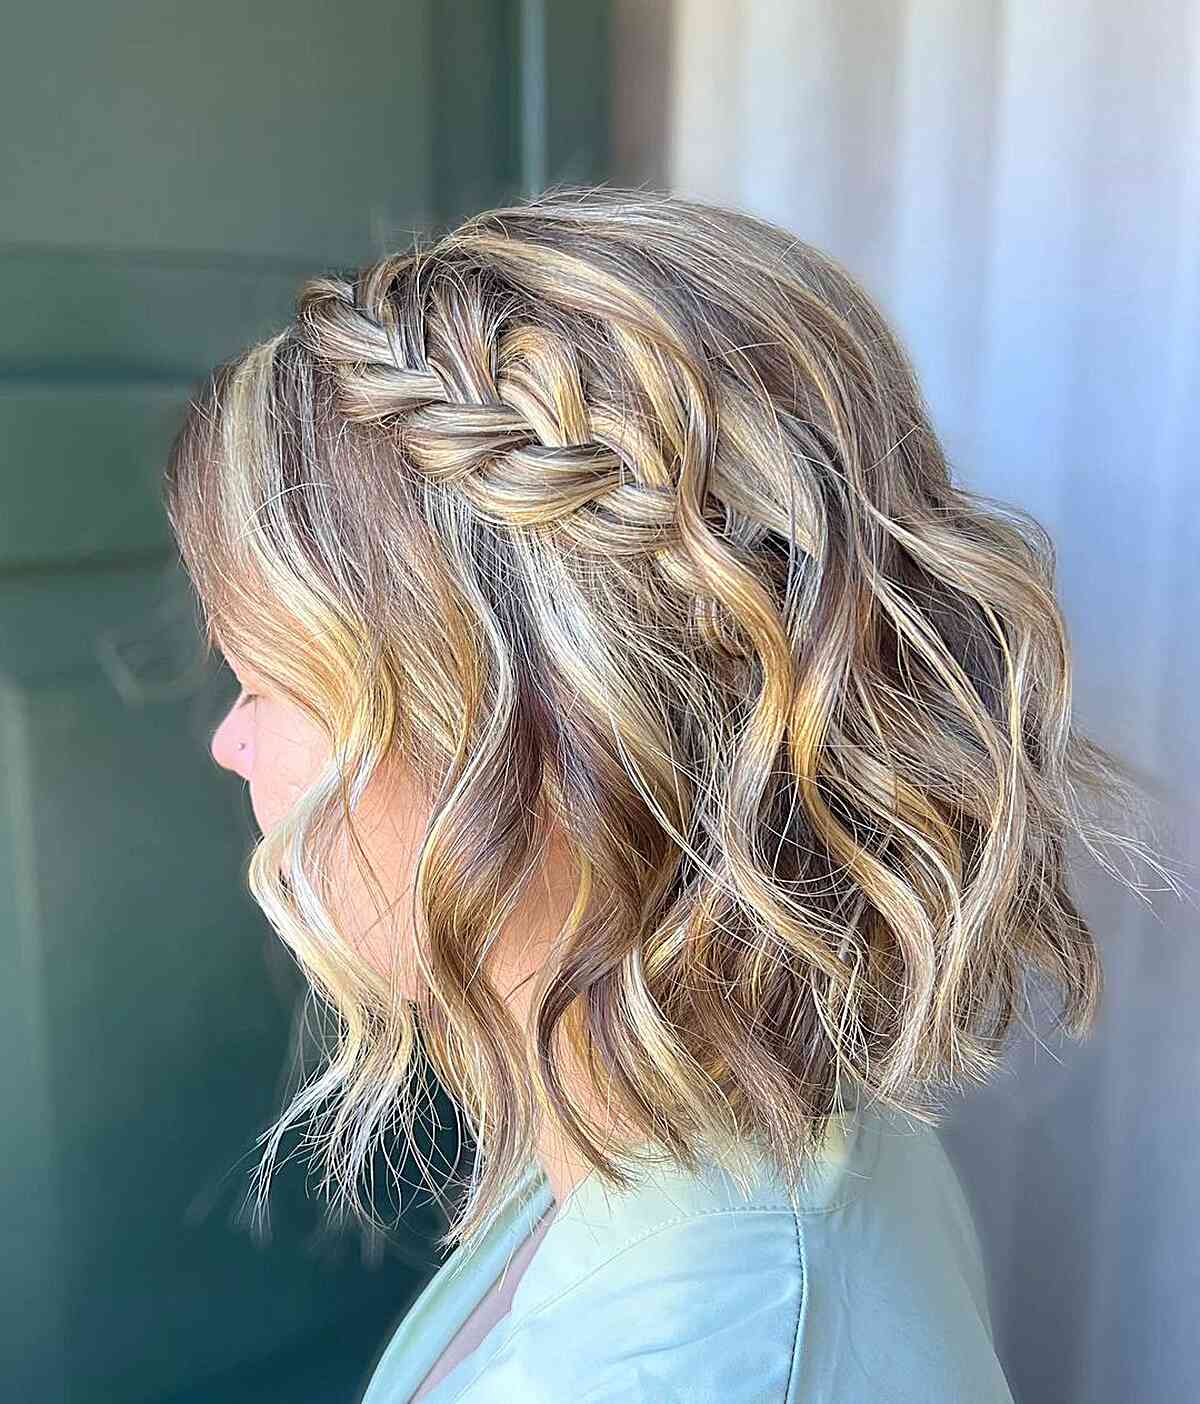 Boho-Inspired Beachy Curls for Ladies with Short Hair